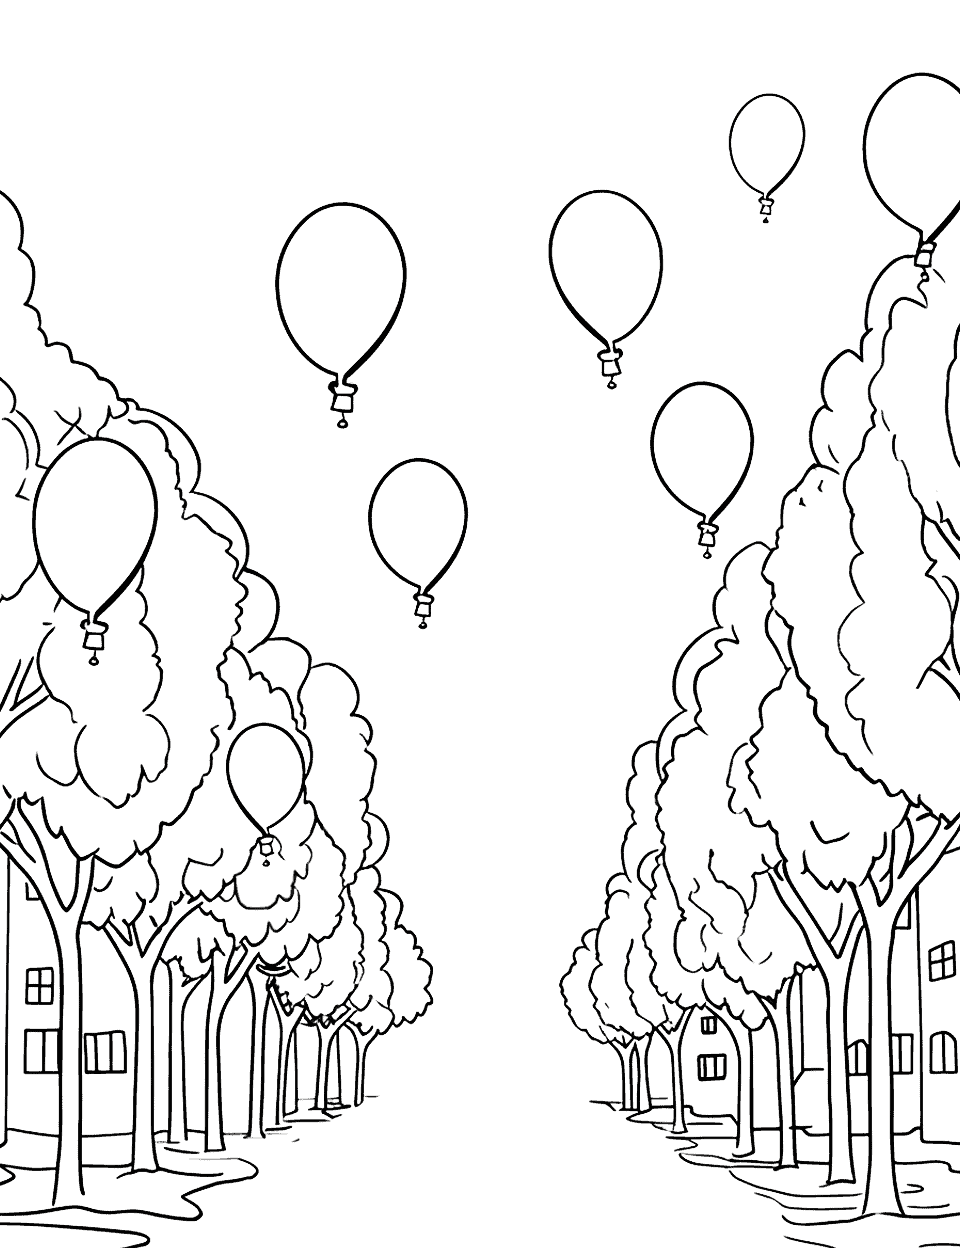 Thanksgiving Day Fall Coloring Page - An easy-to-color page depicting the Thanksgiving Day celebration with balloons and beautiful trees.